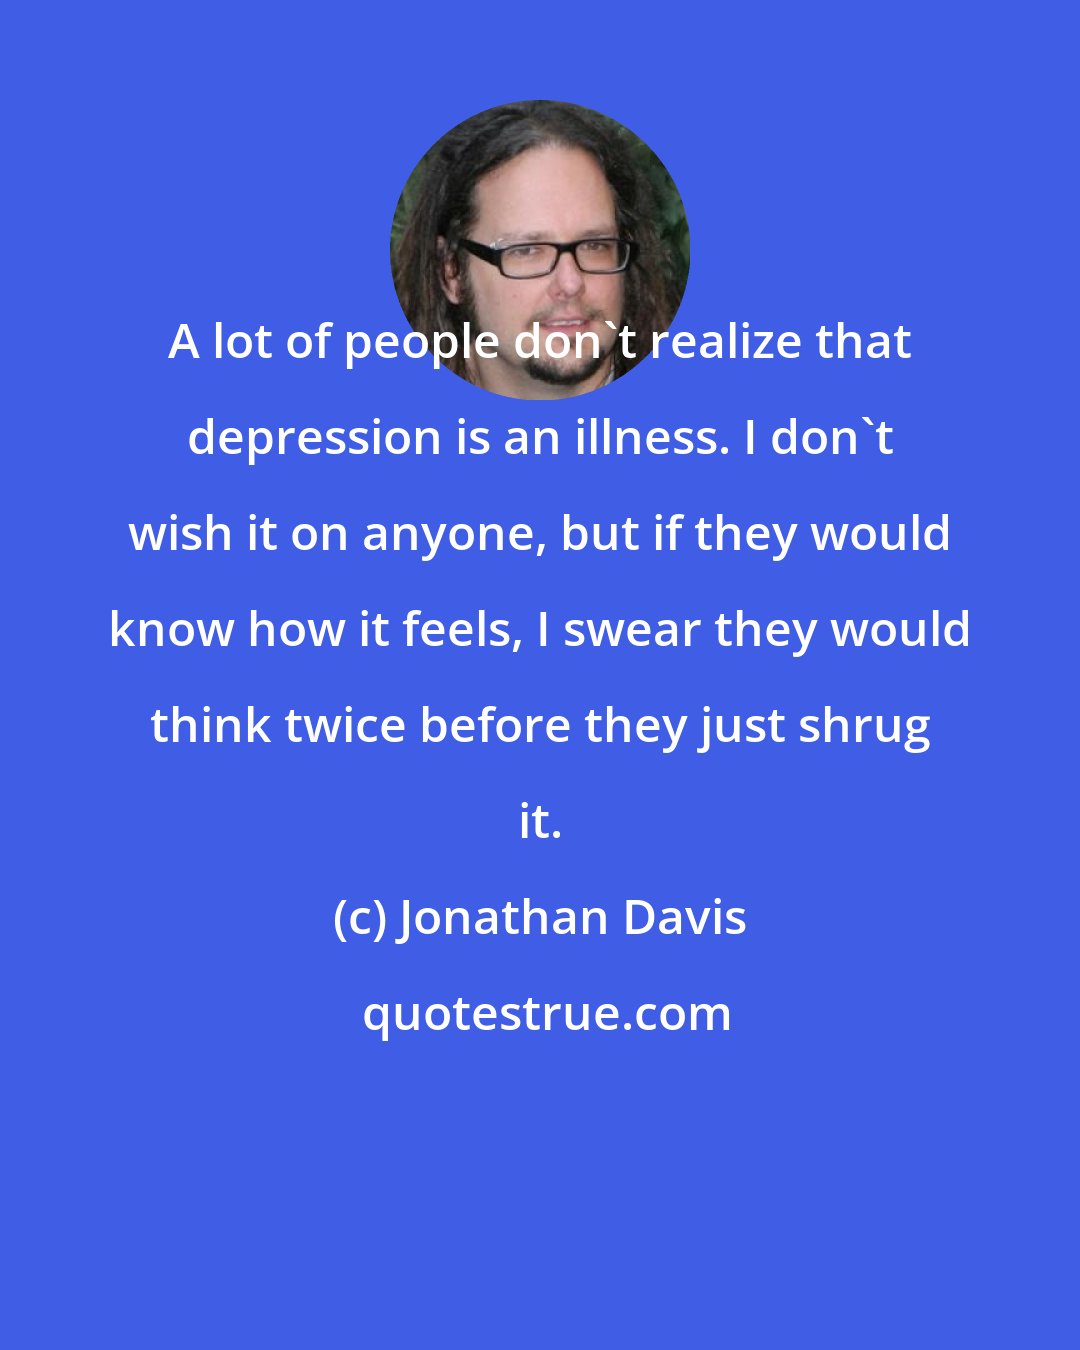 Jonathan Davis: A lot of people don't realize that depression is an illness. I don't wish it on anyone, but if they would know how it feels, I swear they would think twice before they just shrug it.